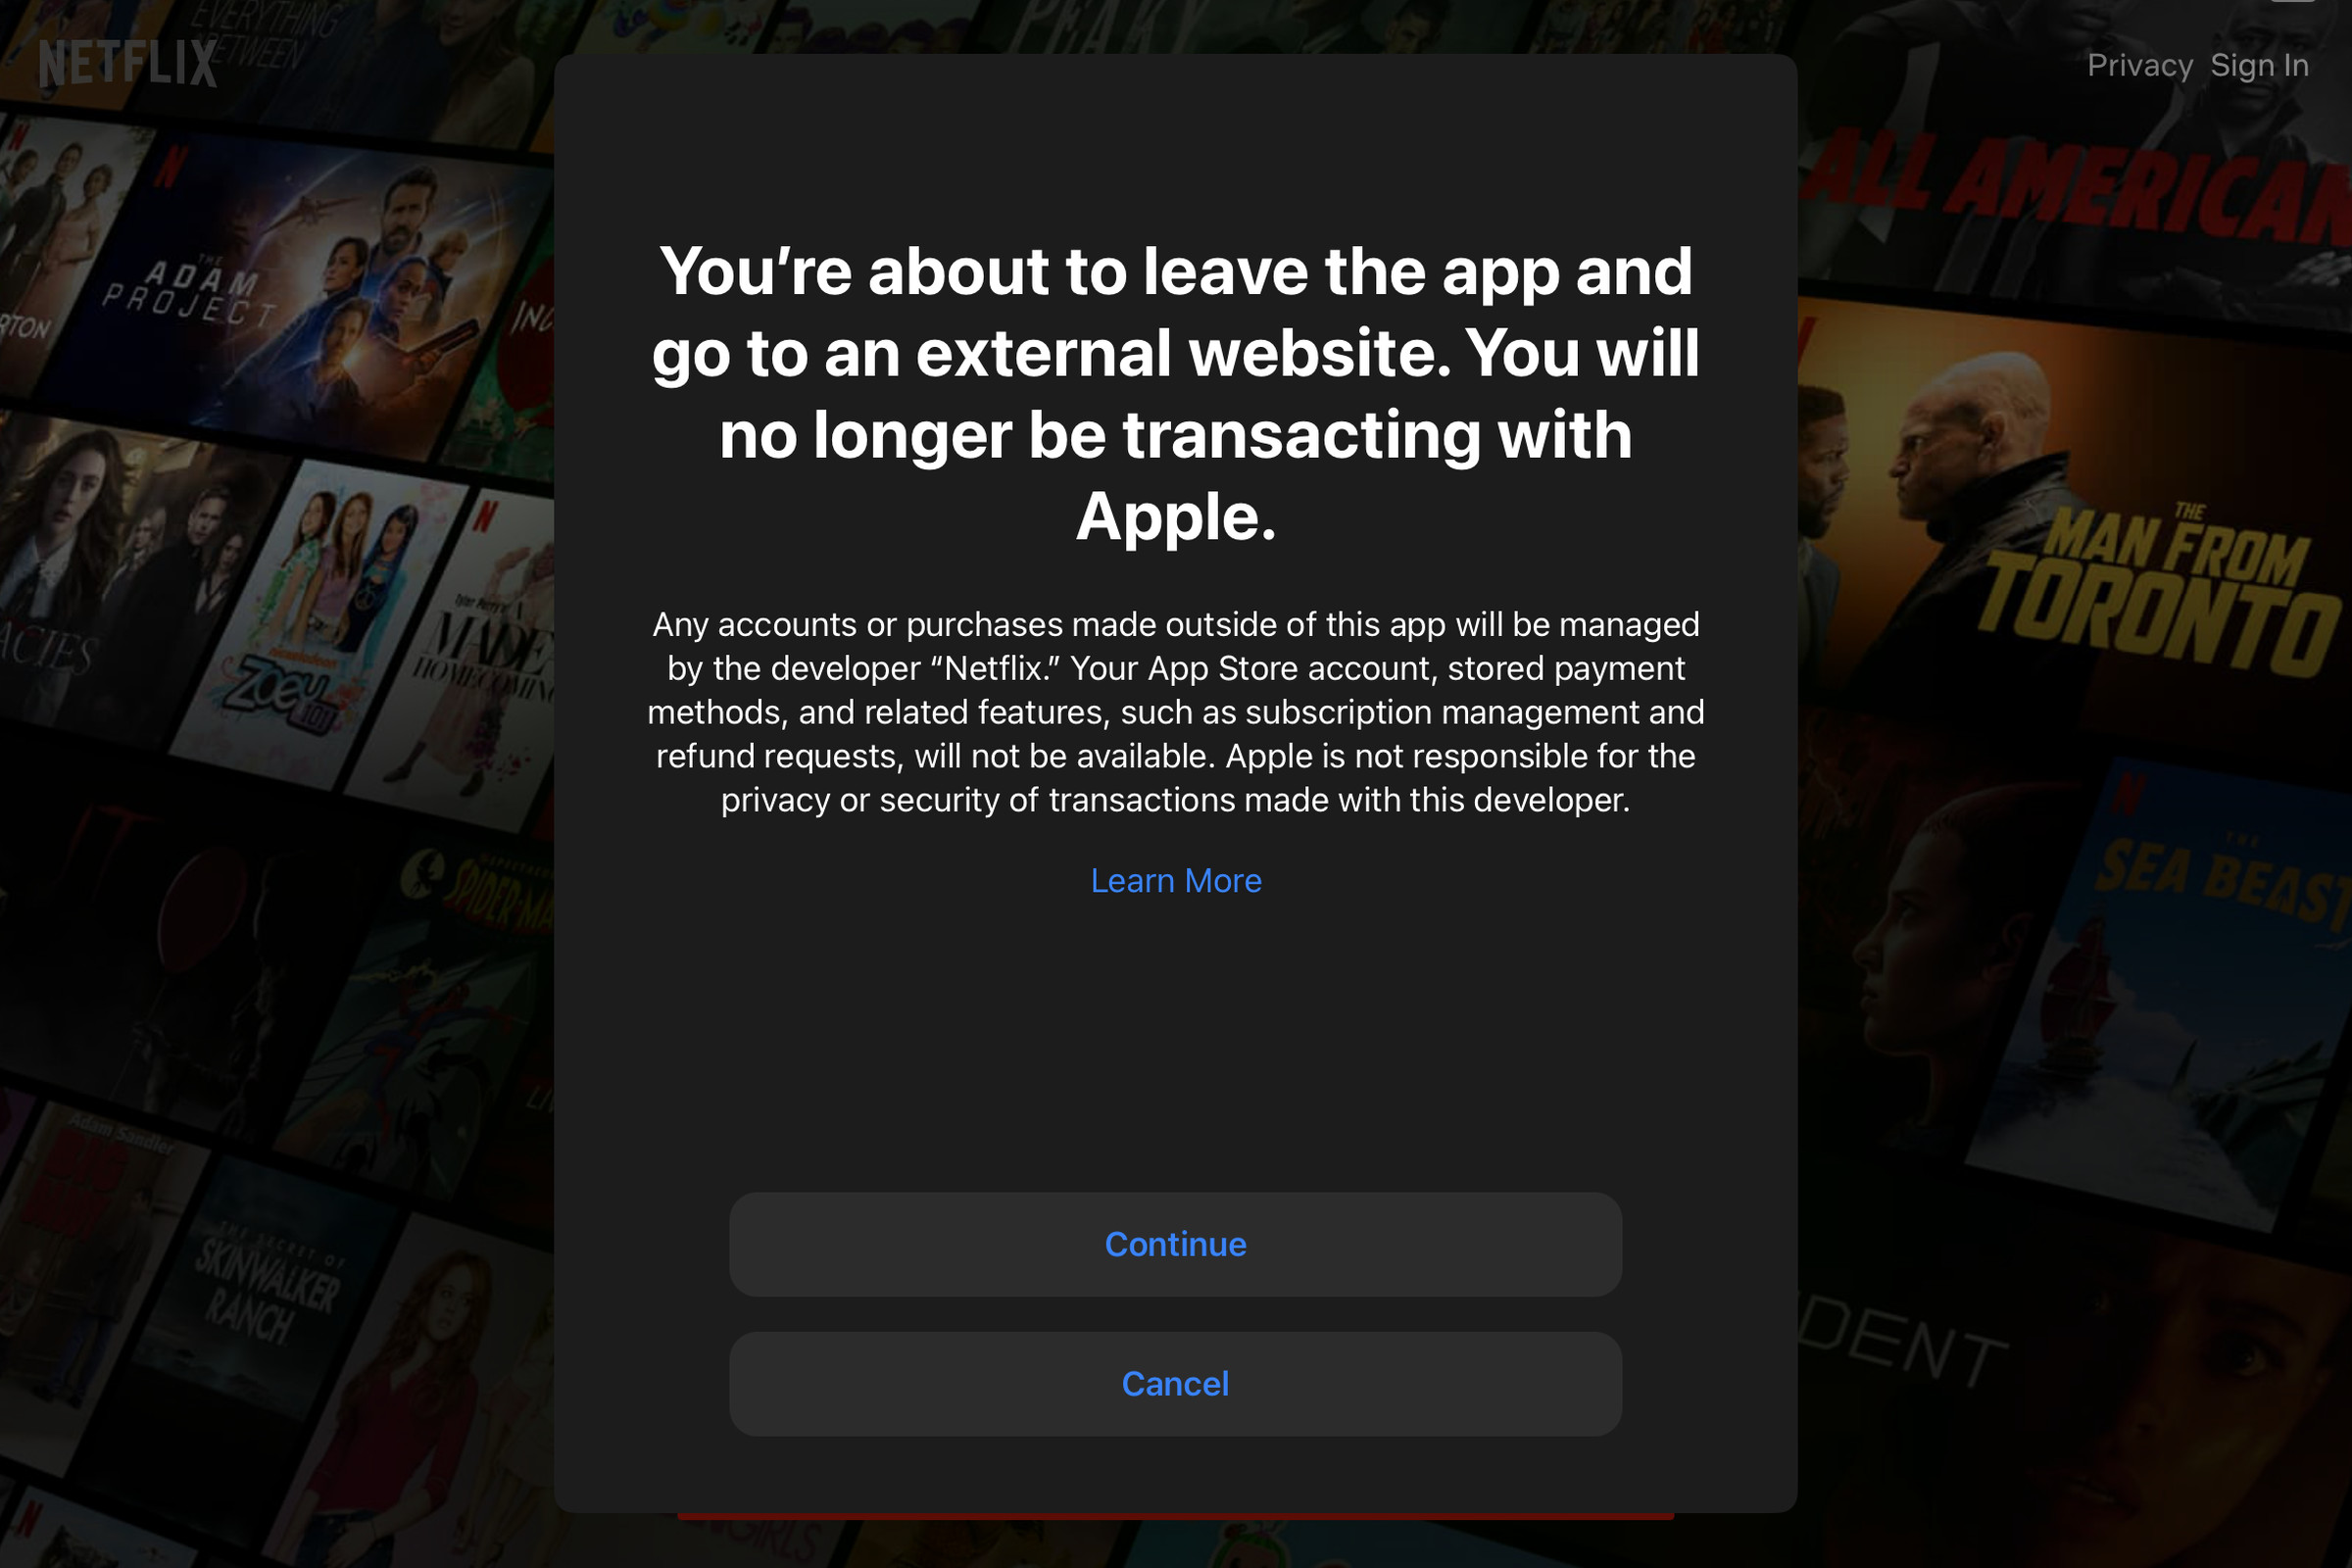 Here’s what you’ll see when trying to sign up for Netflix on the iPhone or iPad app.